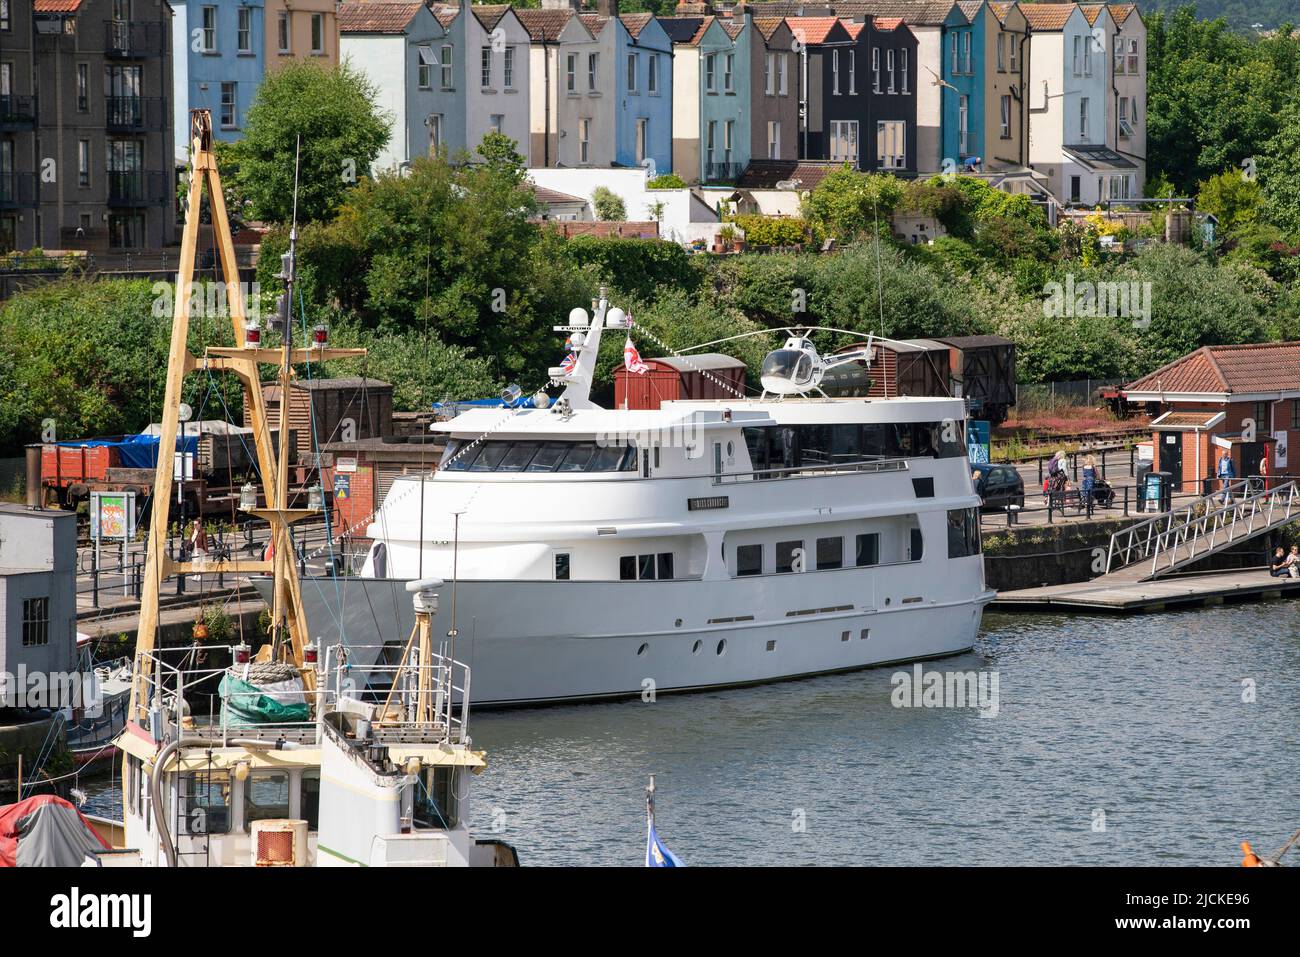 The Miss Conduct yacht moored in the harbourside area of the Bristol floating harbour on a sunny day. Stock Photo